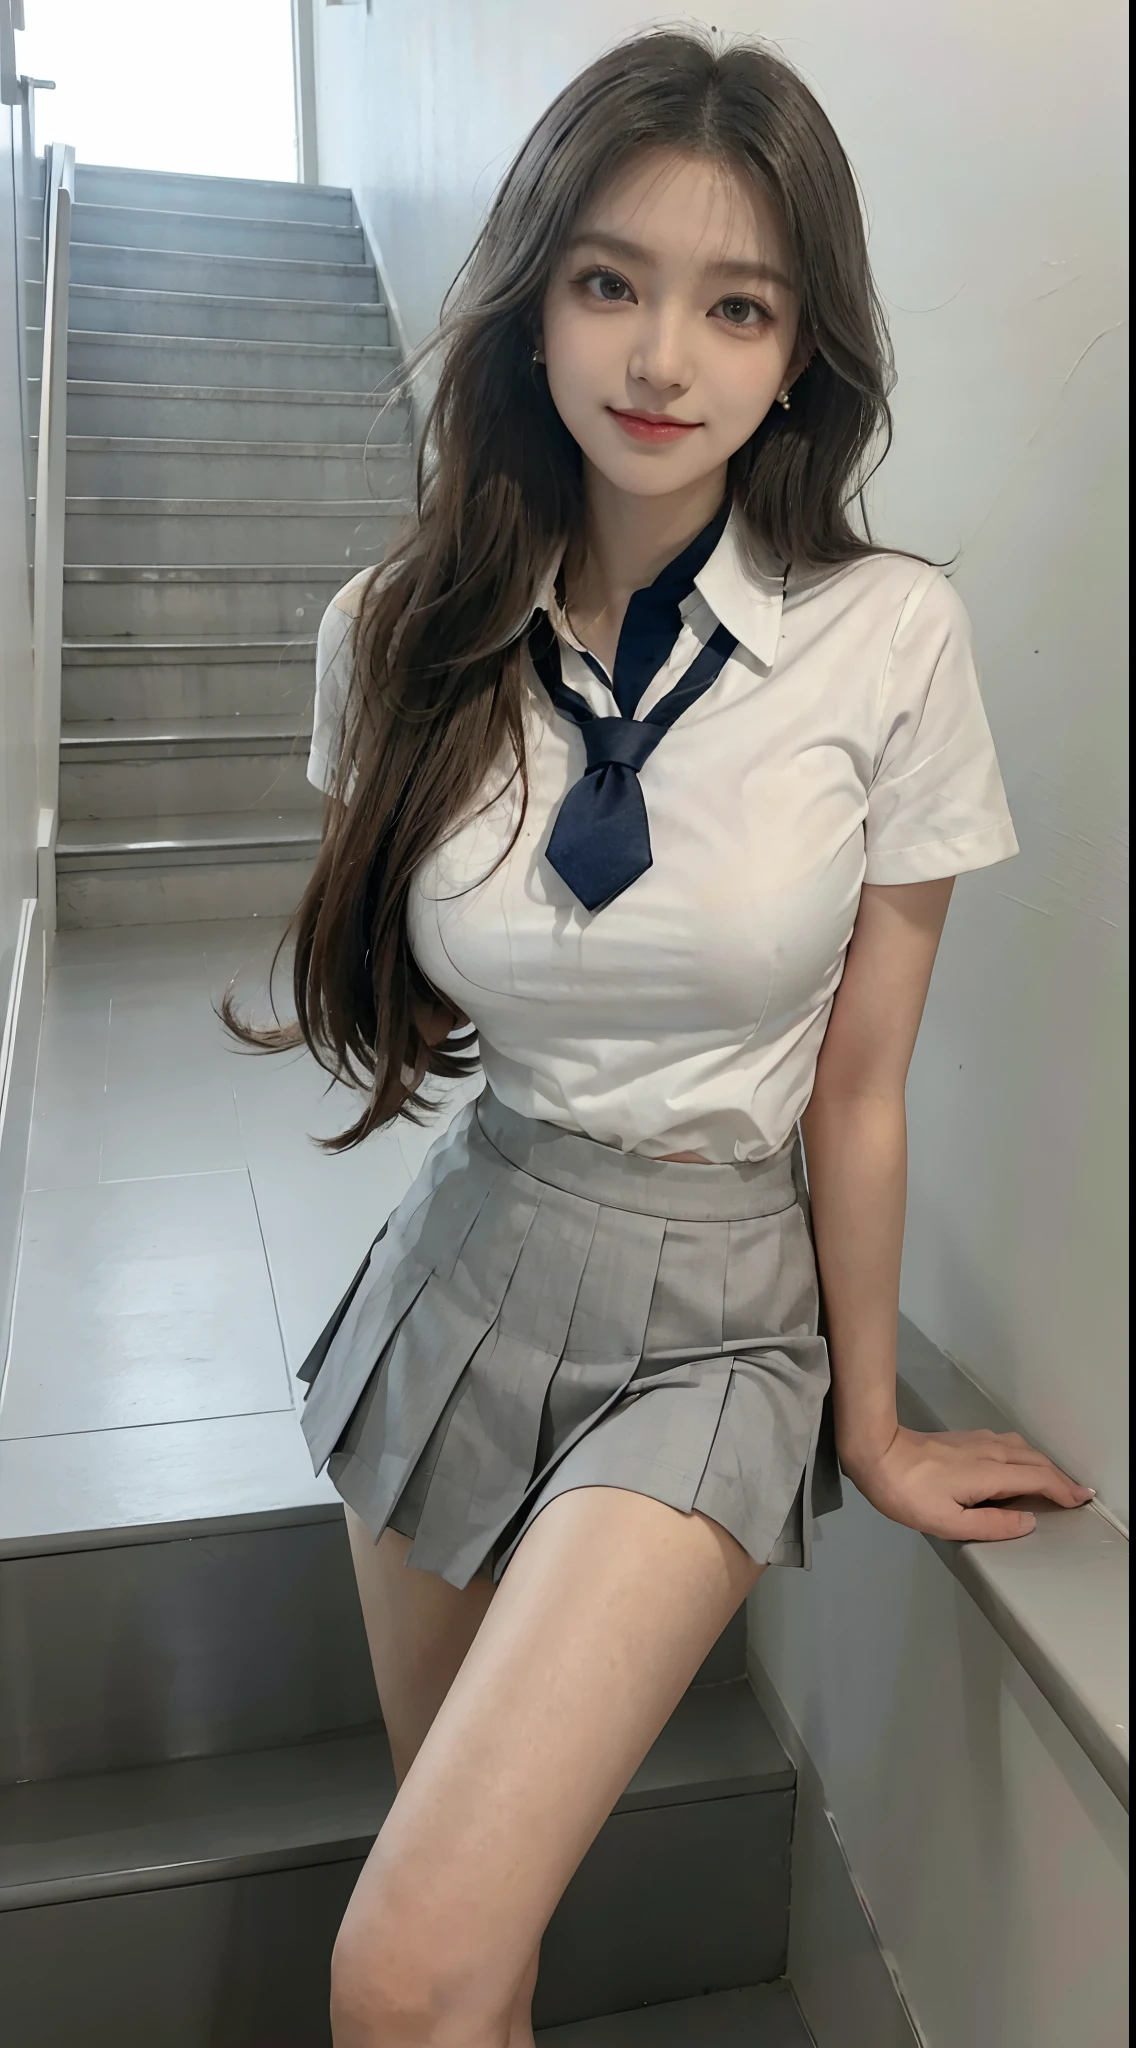 Arafed asian woman in a school uniform posing for a picture - SeaArt AI